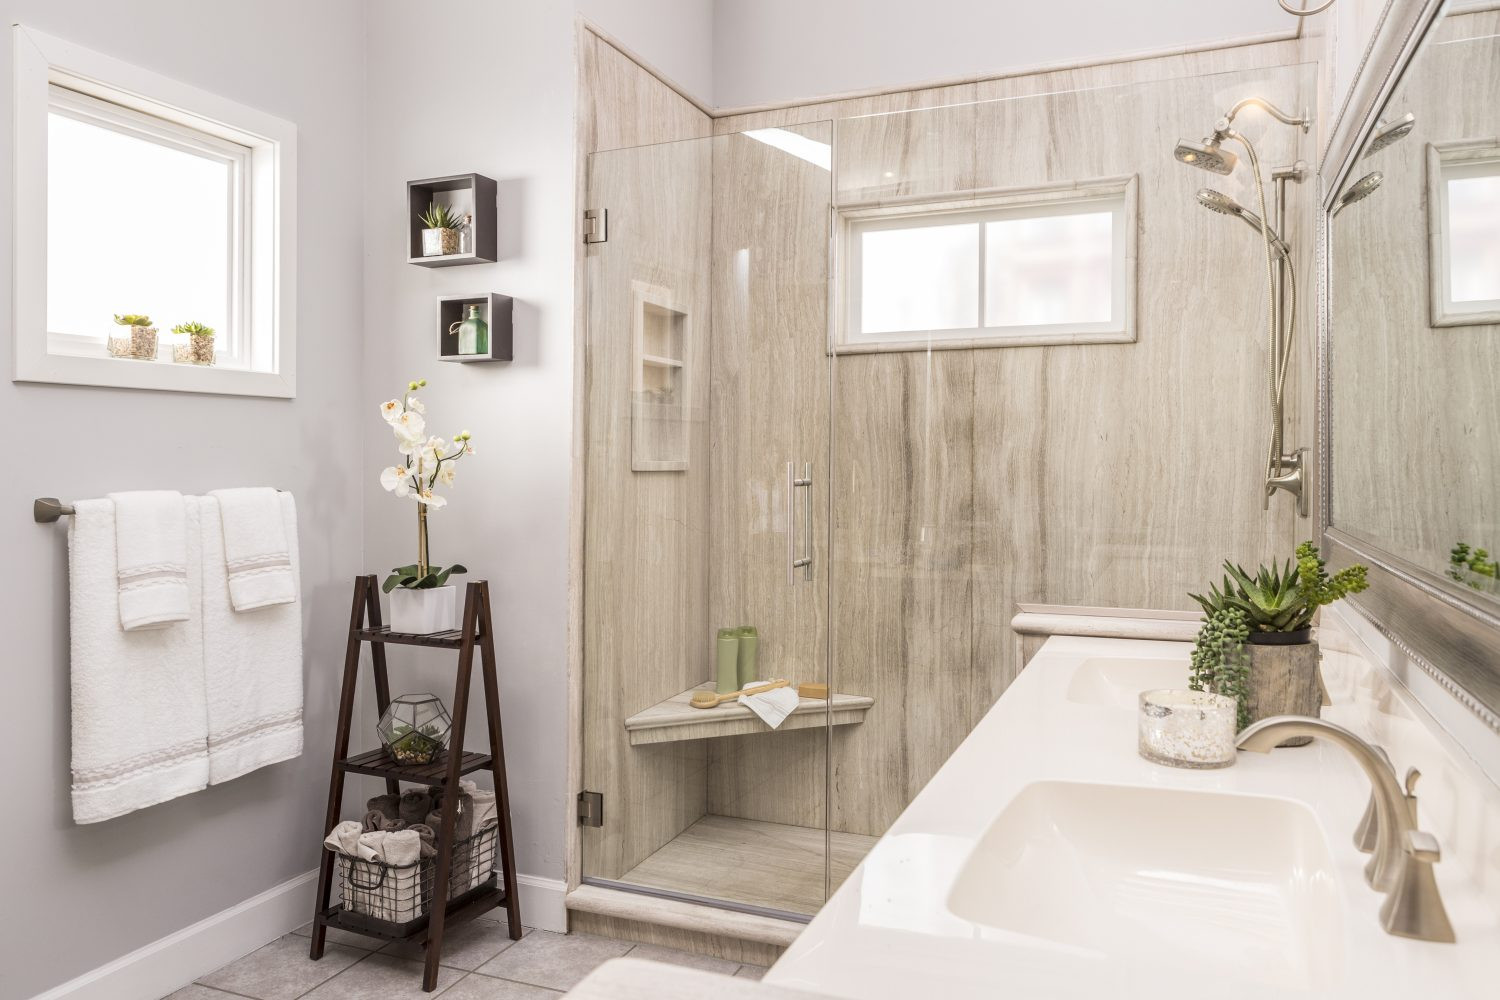 Bathroom Showers And Tubs
 Update Shower – Update Bathtub – Remodel Project Solutions